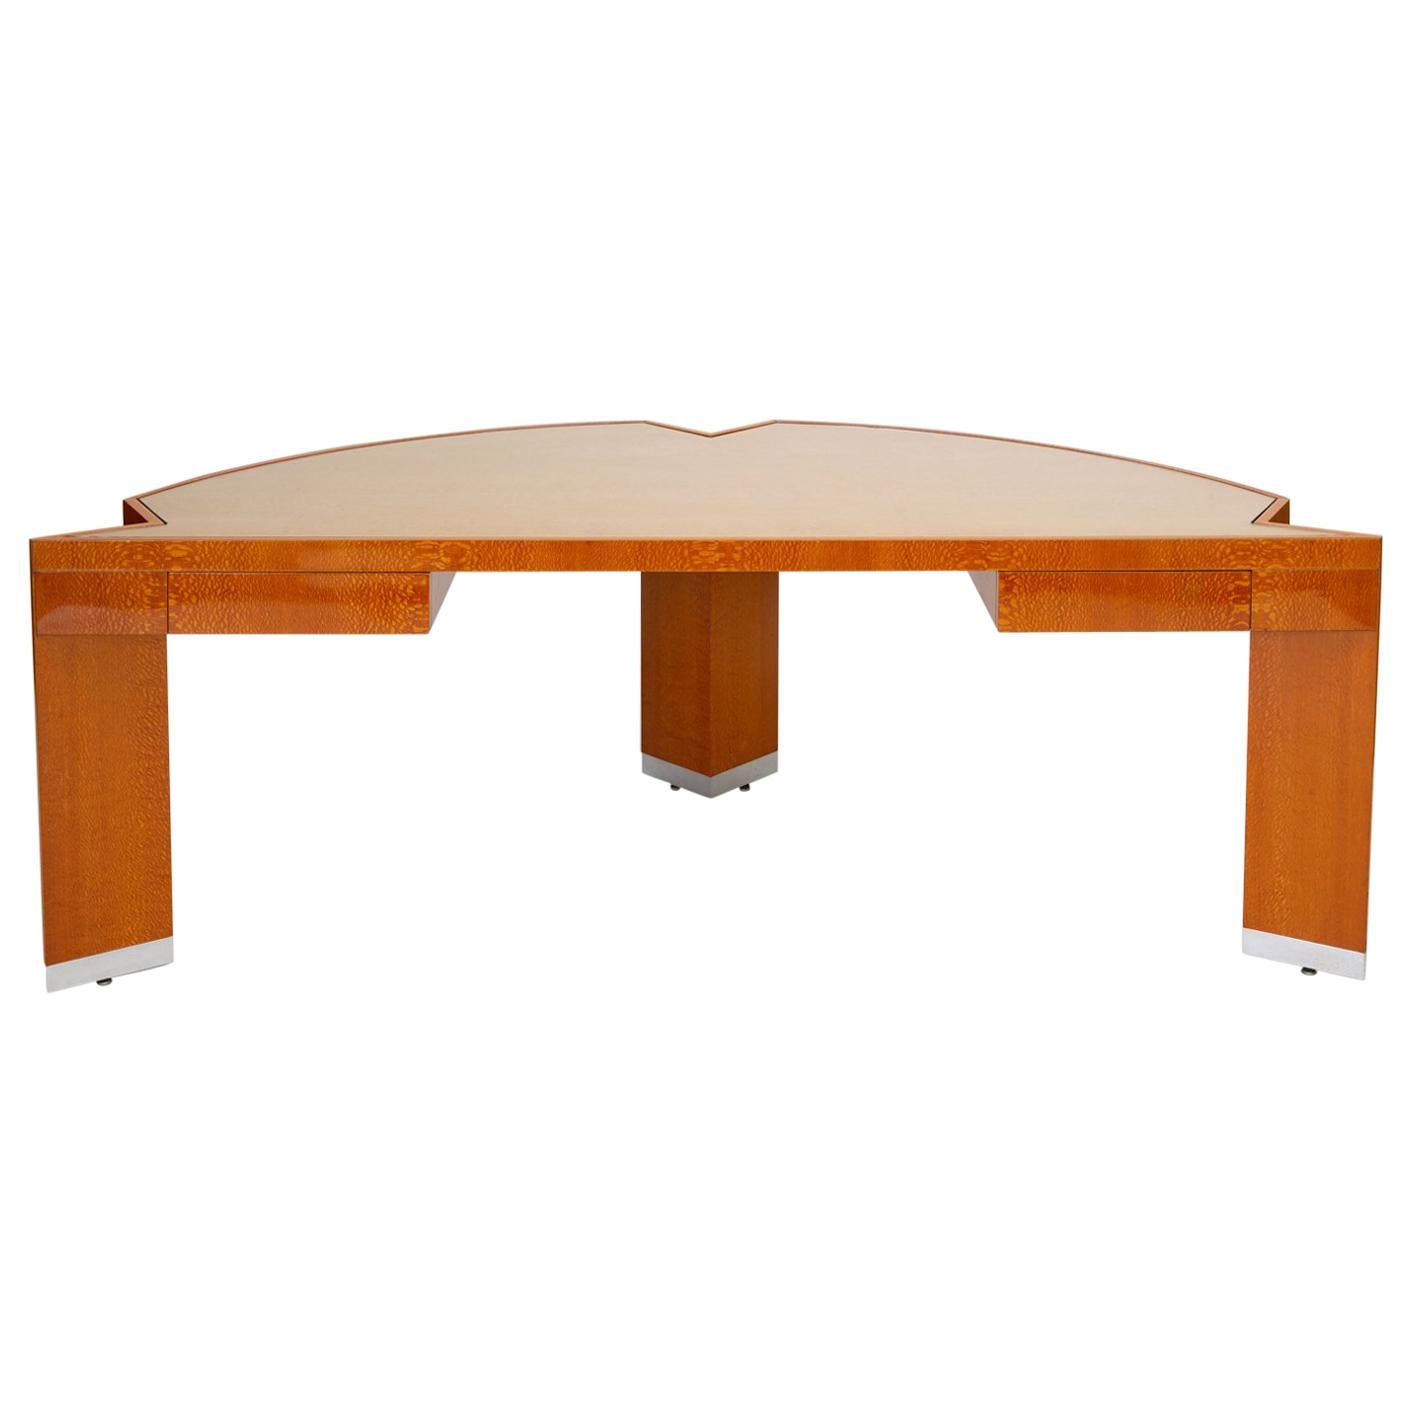 Custom Lacewood “Mezzaluna” Office Desk by Pace Collection